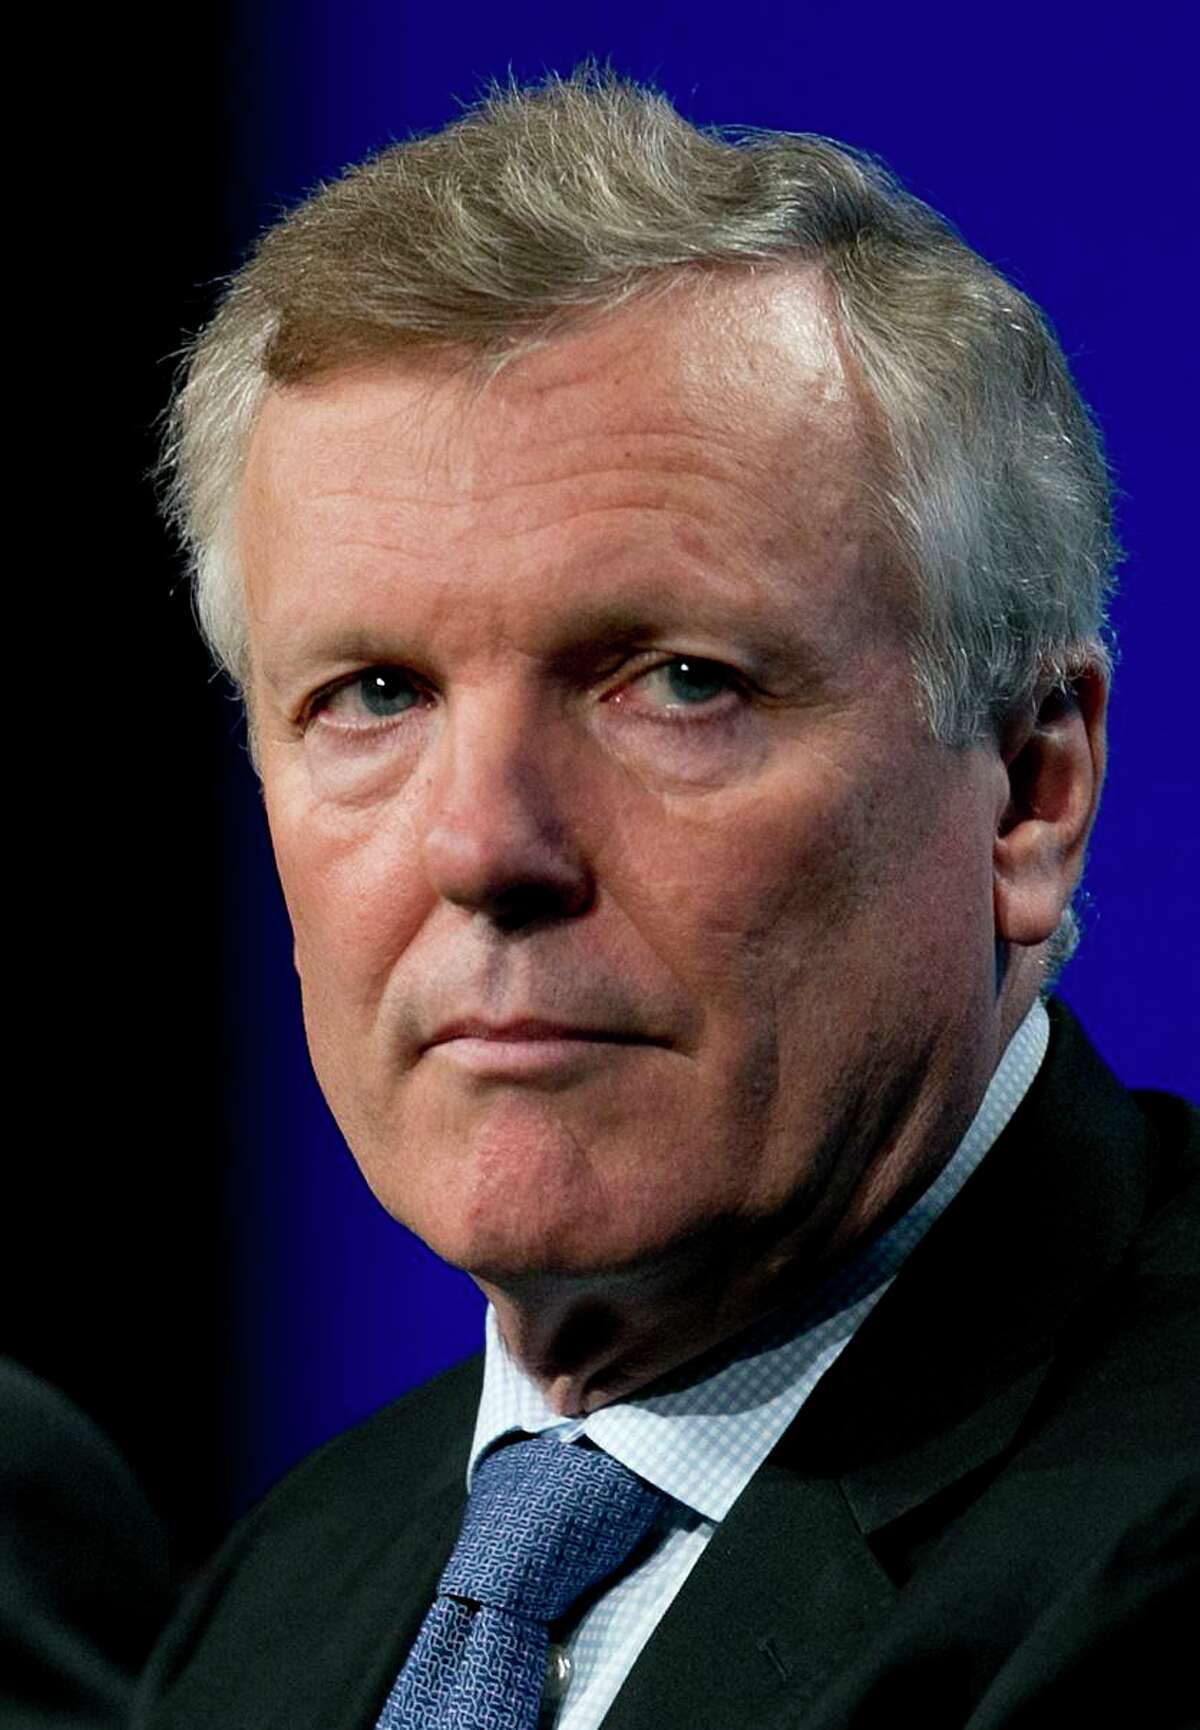 The compensation of Tom Rutledge, chief executive officer of Stamford-based Charter Communications, totaled nearly $42 million in 2021, according to an analysis of S&P 500 CEOs’ pay conducted by Equilar, a provider of corporate leadership data. Rutledge’s total included about $30 million in option awards.